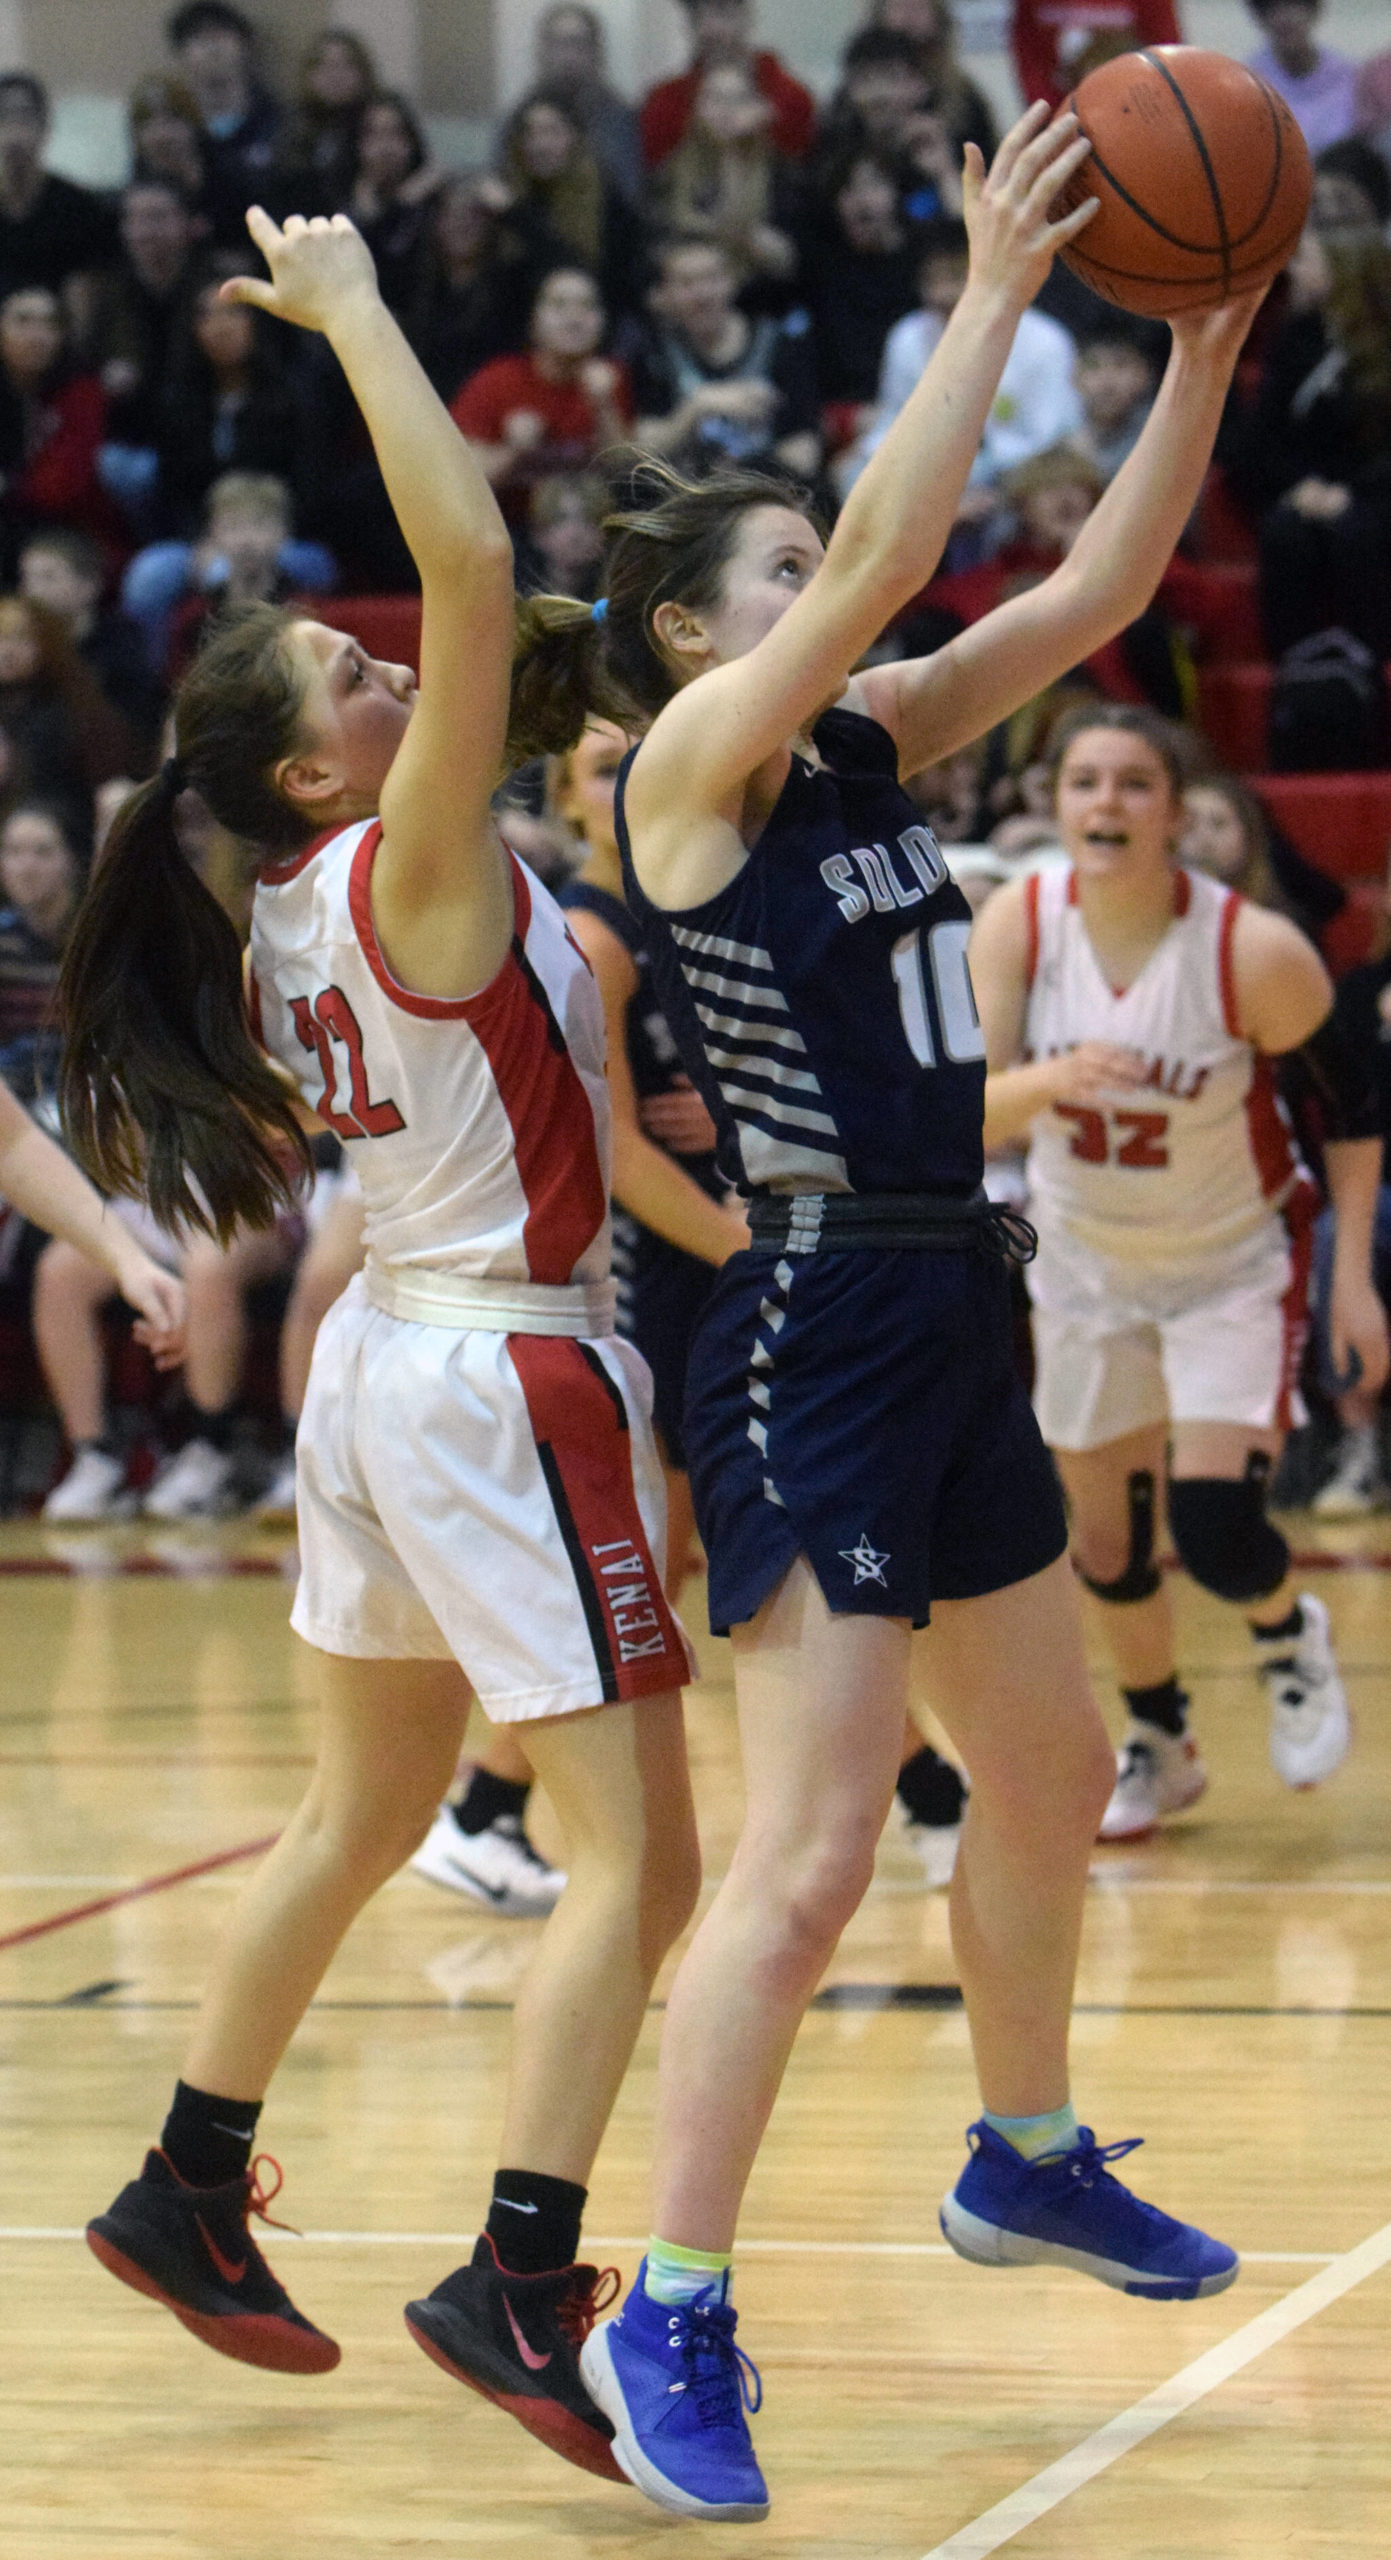 Soldotna’s Kaitlyn McAnelly grabs a rebound in front of Kenai Central’s Emilee Wilson on Friday, Feb. 25, 2022, at Kenai Central High School in Kenai, Alaska. (Photo by Jeff Helminiak/Peninsula Clarion)